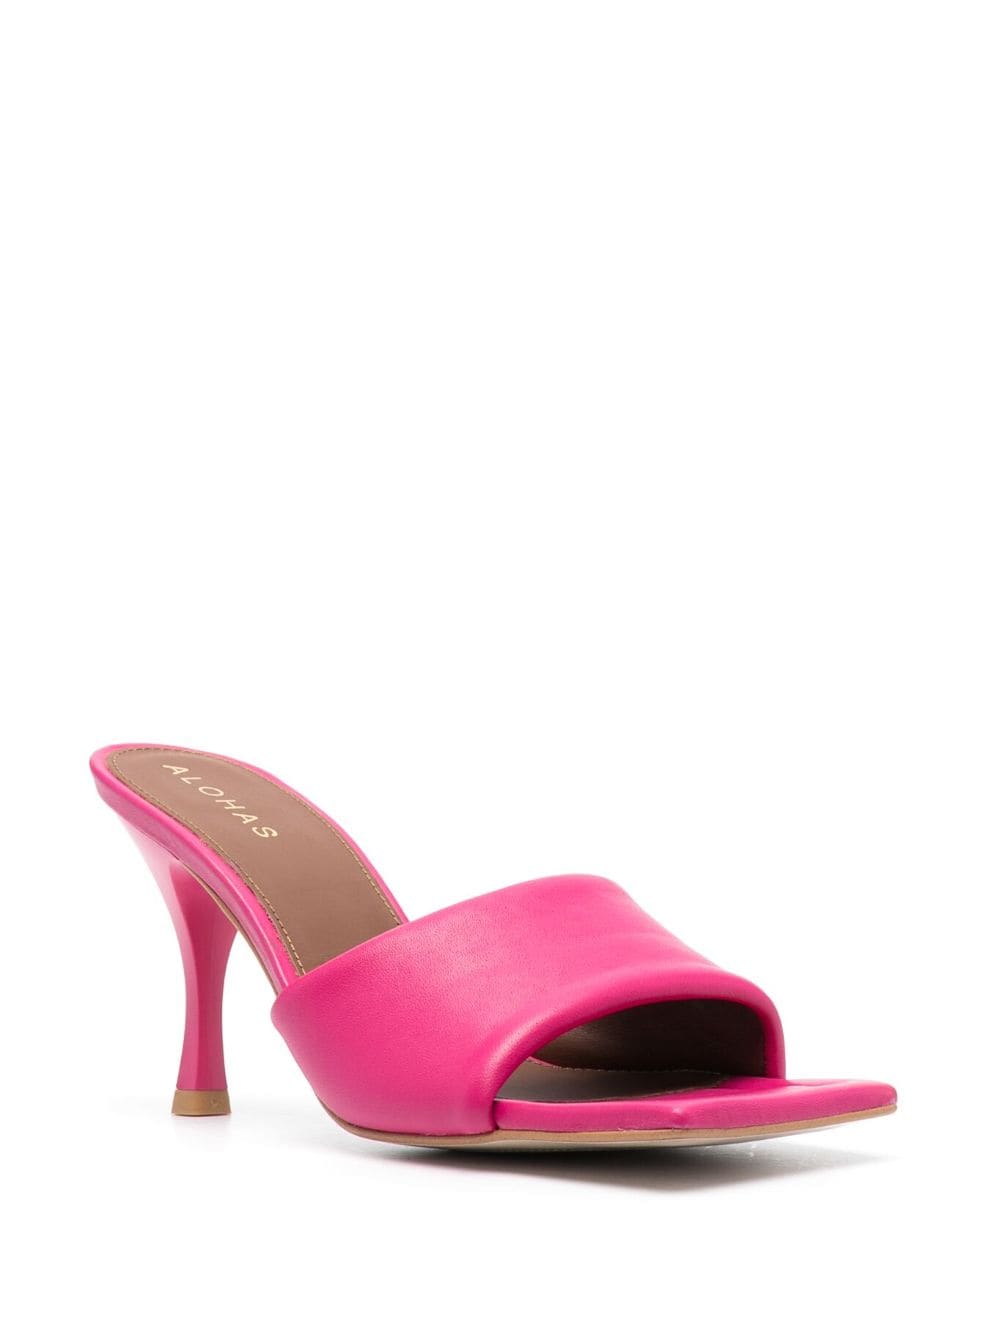 Alohas Puffy Mule In Pink | ModeSens